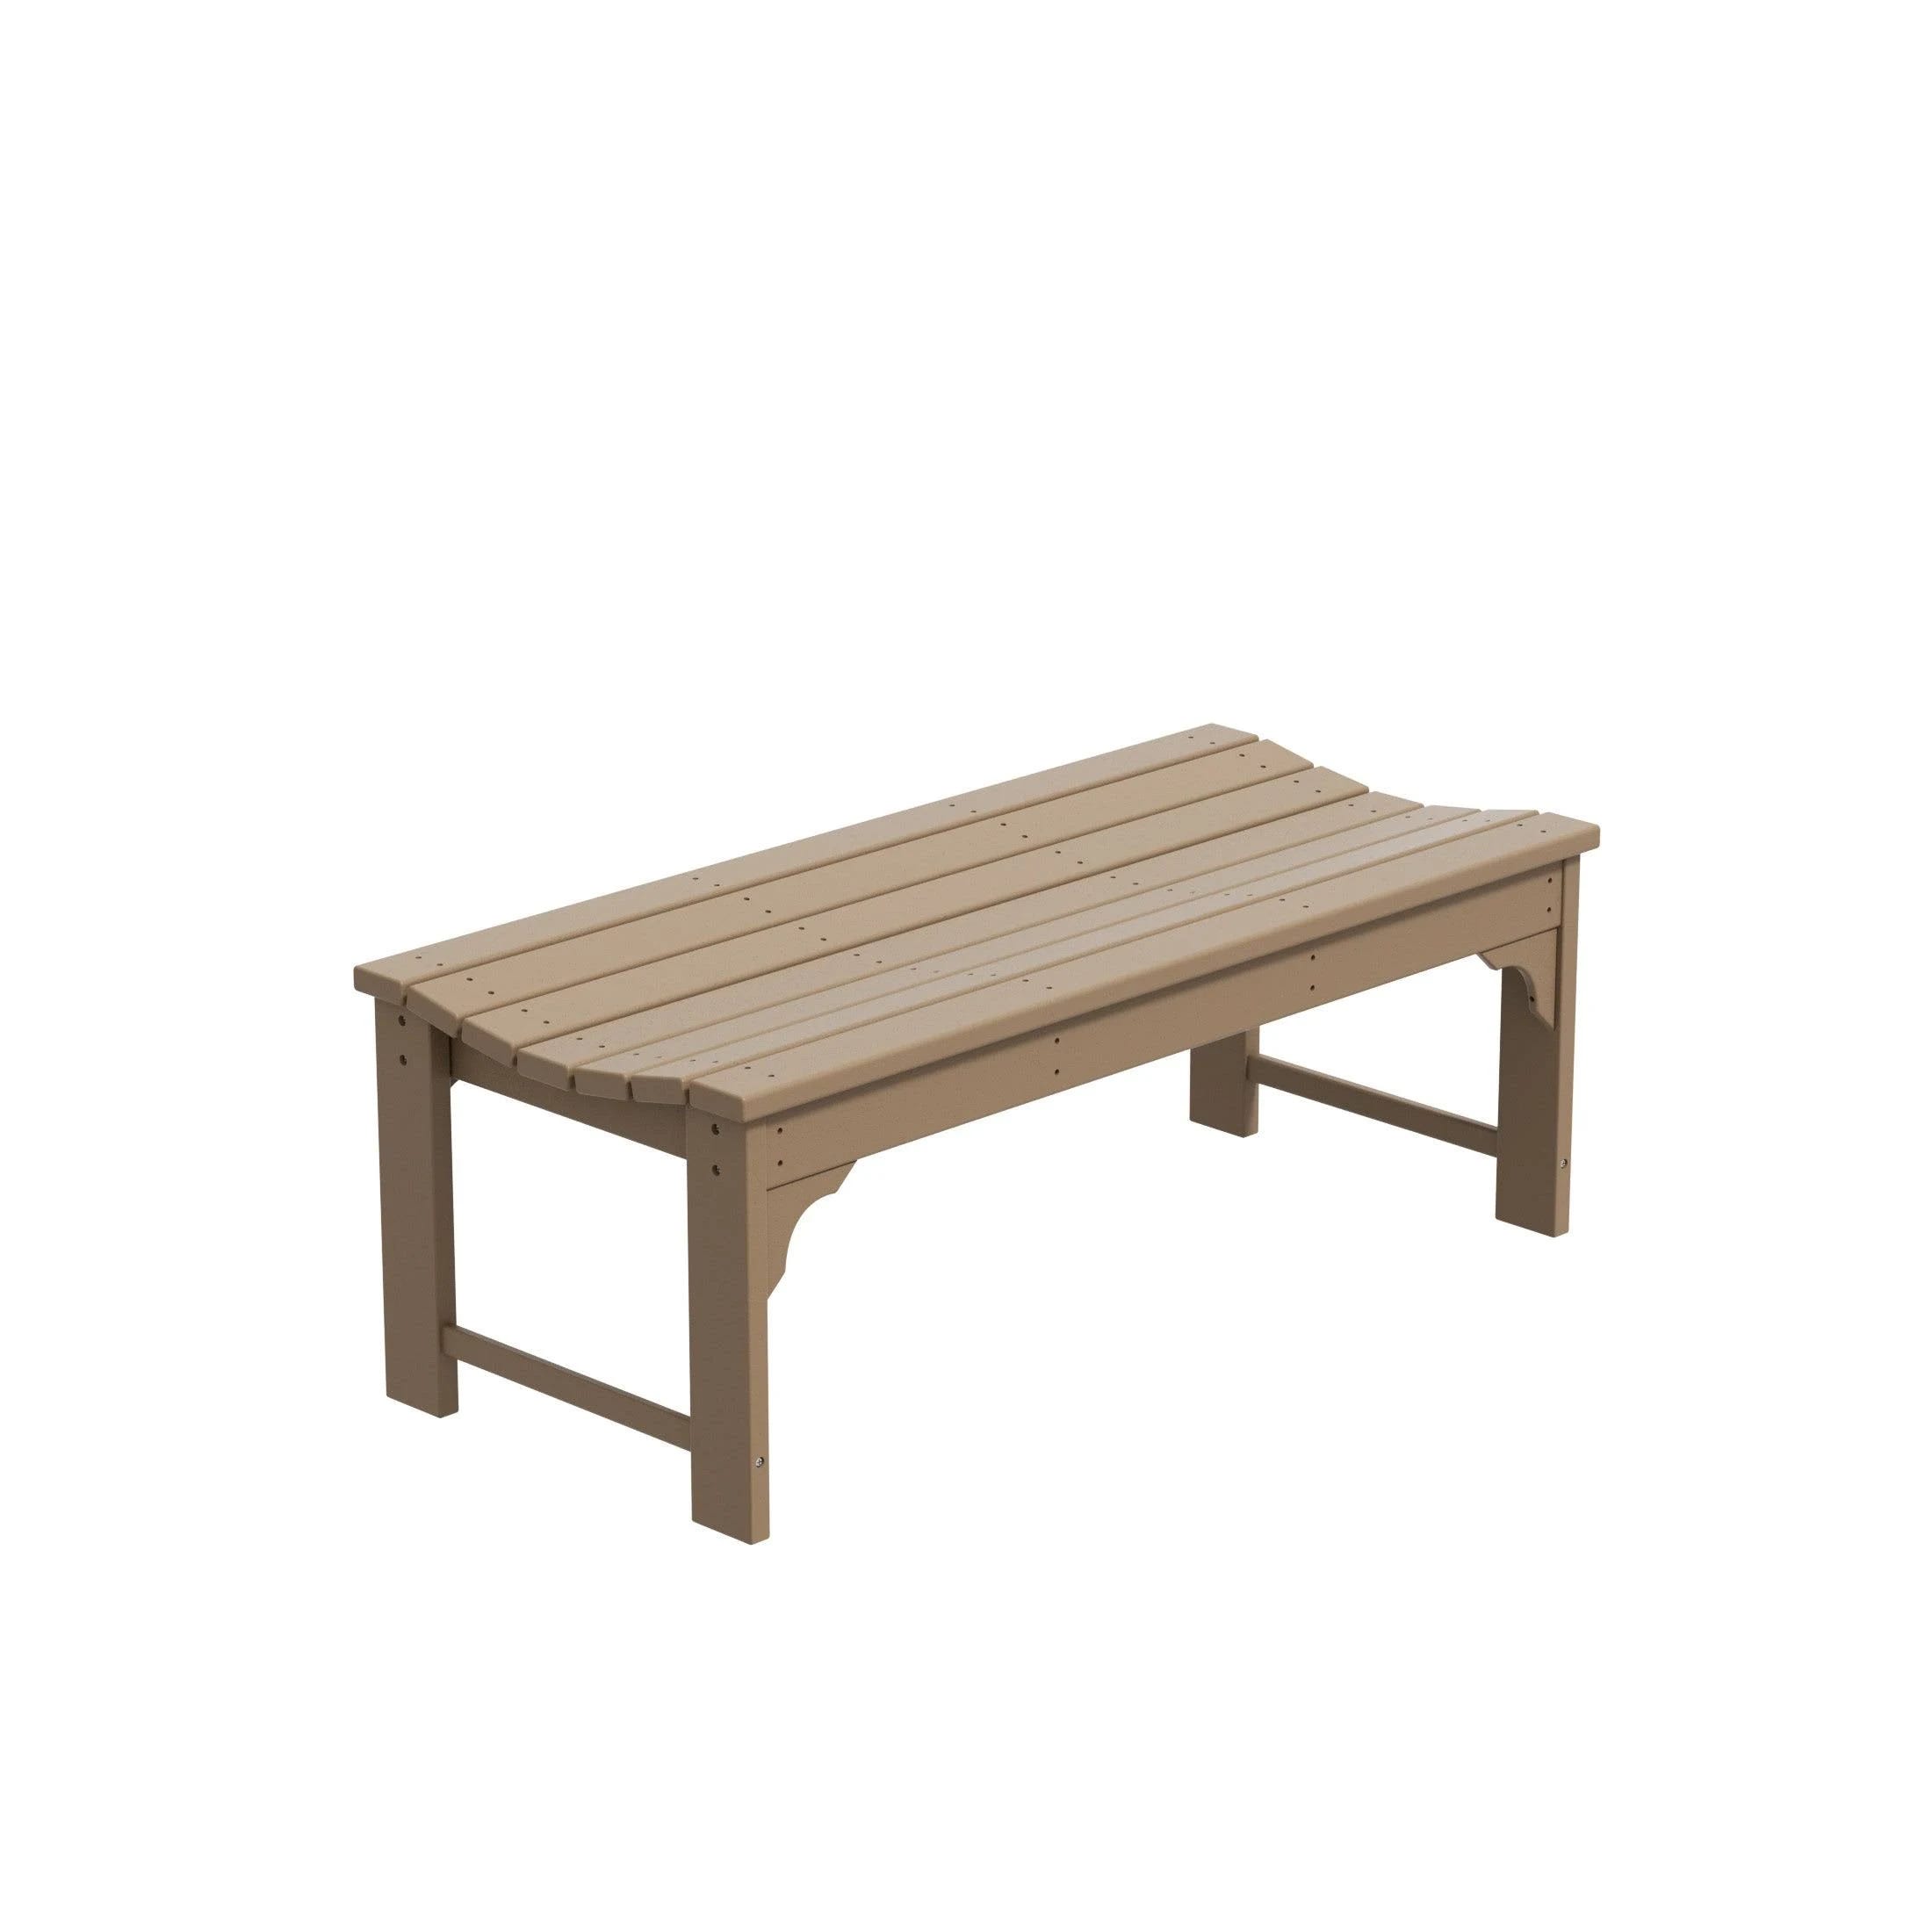 Weathered Wood Backless Porch Bench for All Seasons | Image